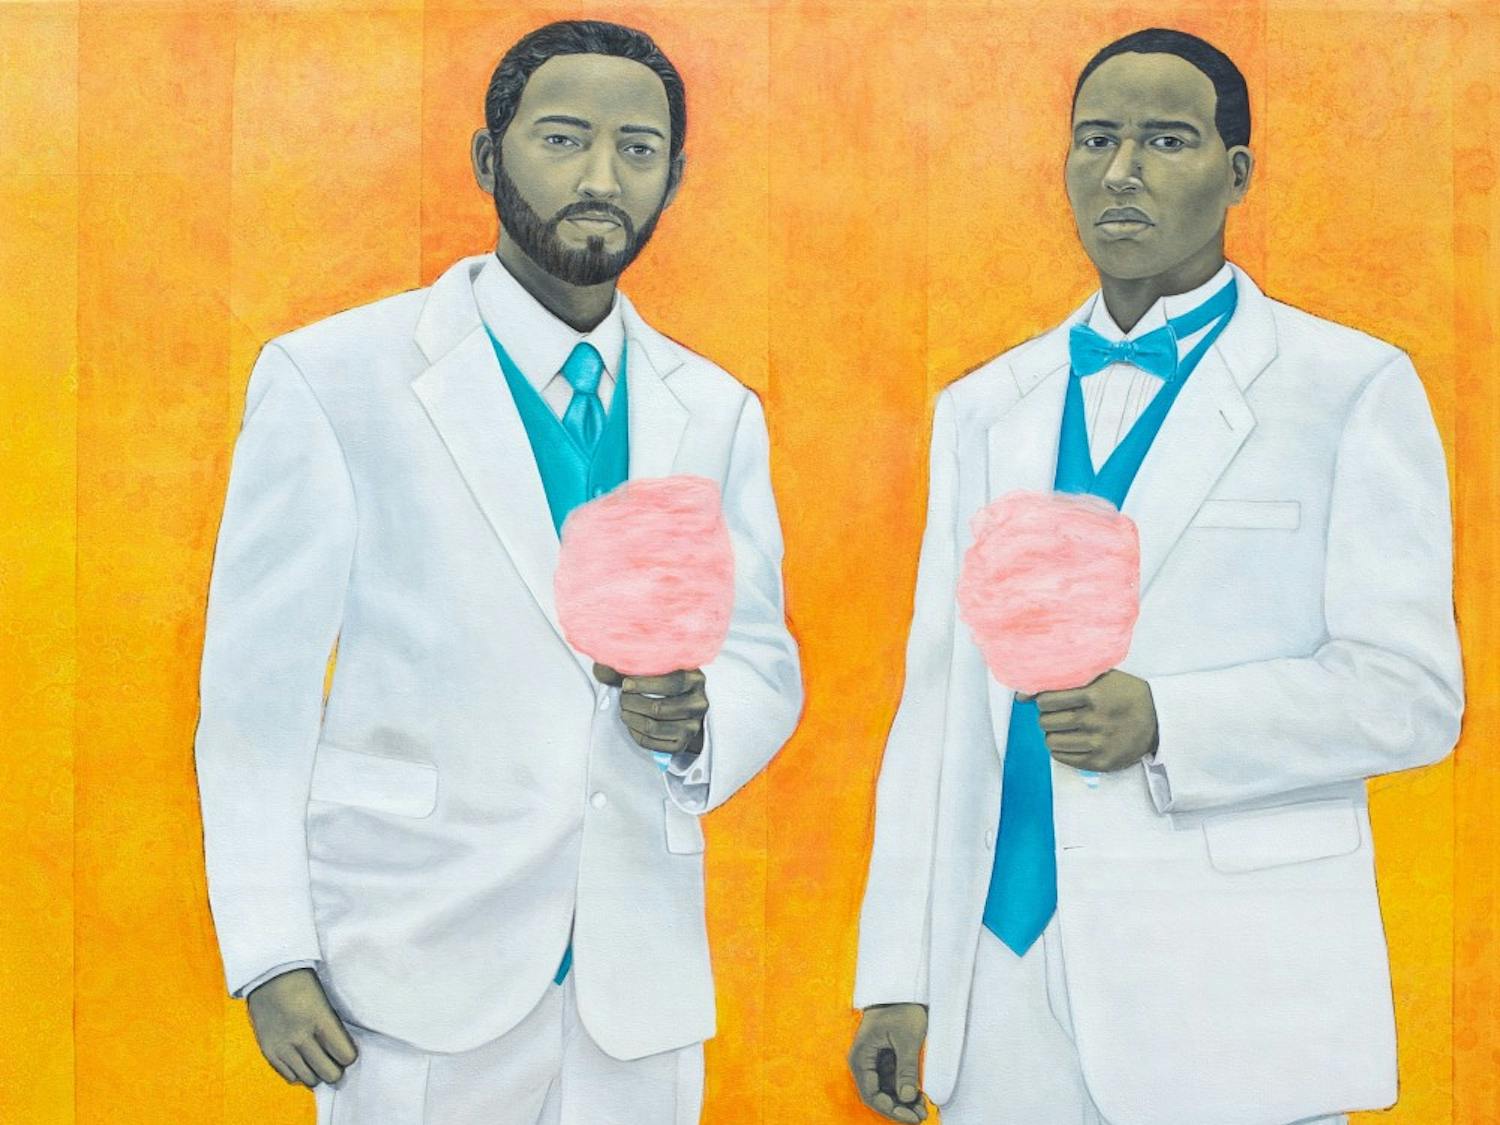 The piece&nbsp;"High Yella Masterpiece: We Ain't No Cotton Pickin' Negroes" by Amy Sherald is&nbsp;featured in the&nbsp;“Southern Accent” exhibition,&nbsp;one of the largest exhibits the Nasher has ever created.